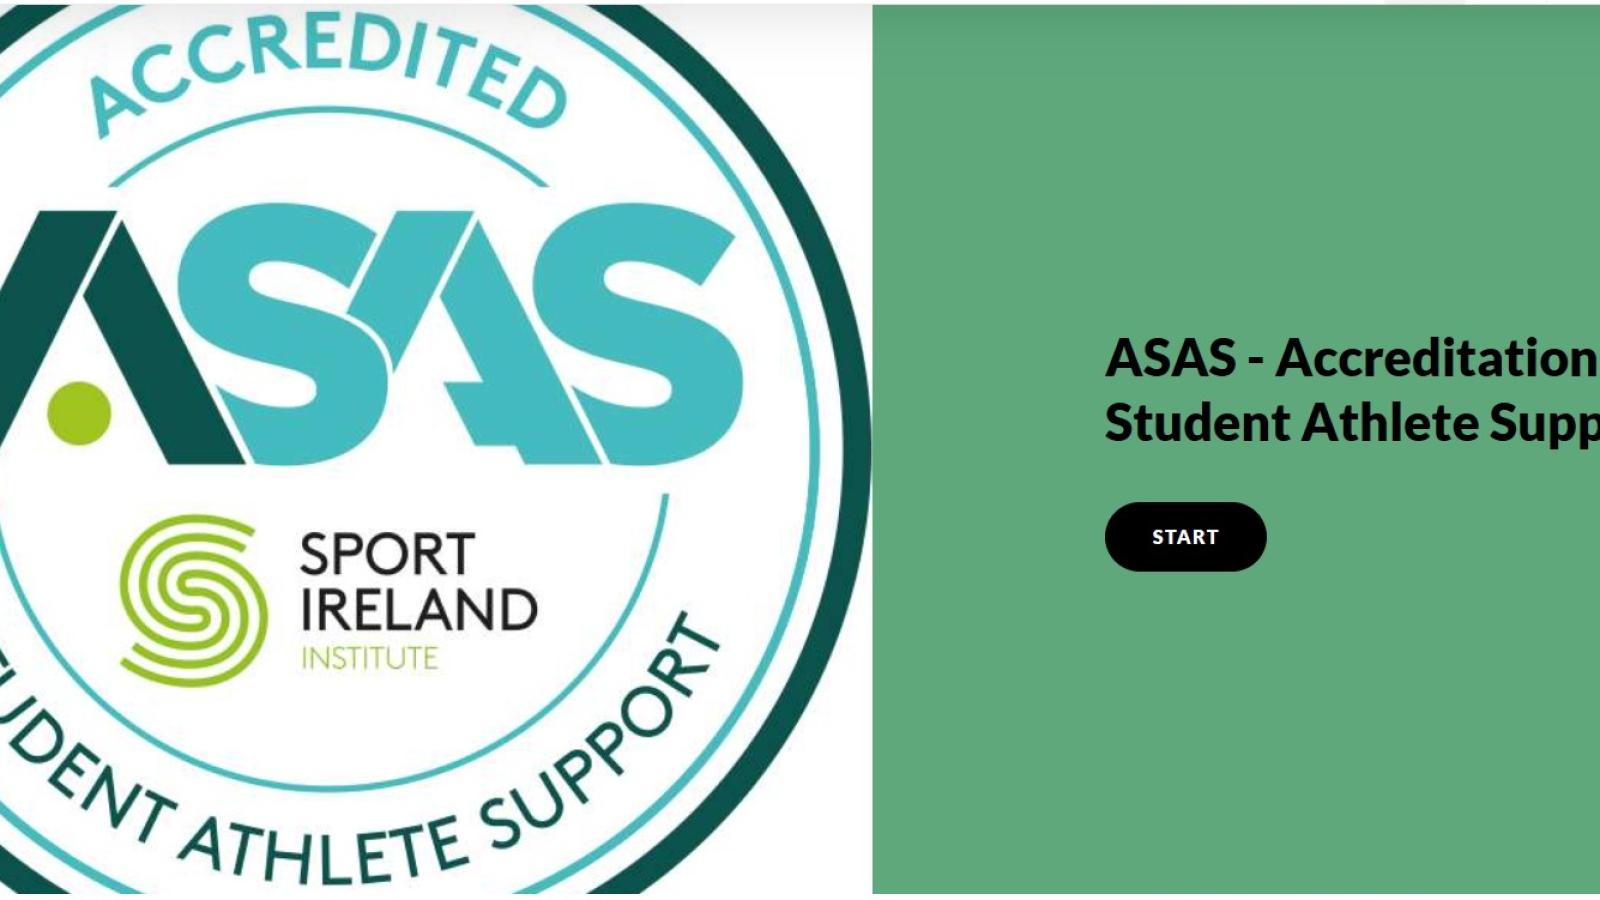 Accreditation for Student Athlete Support